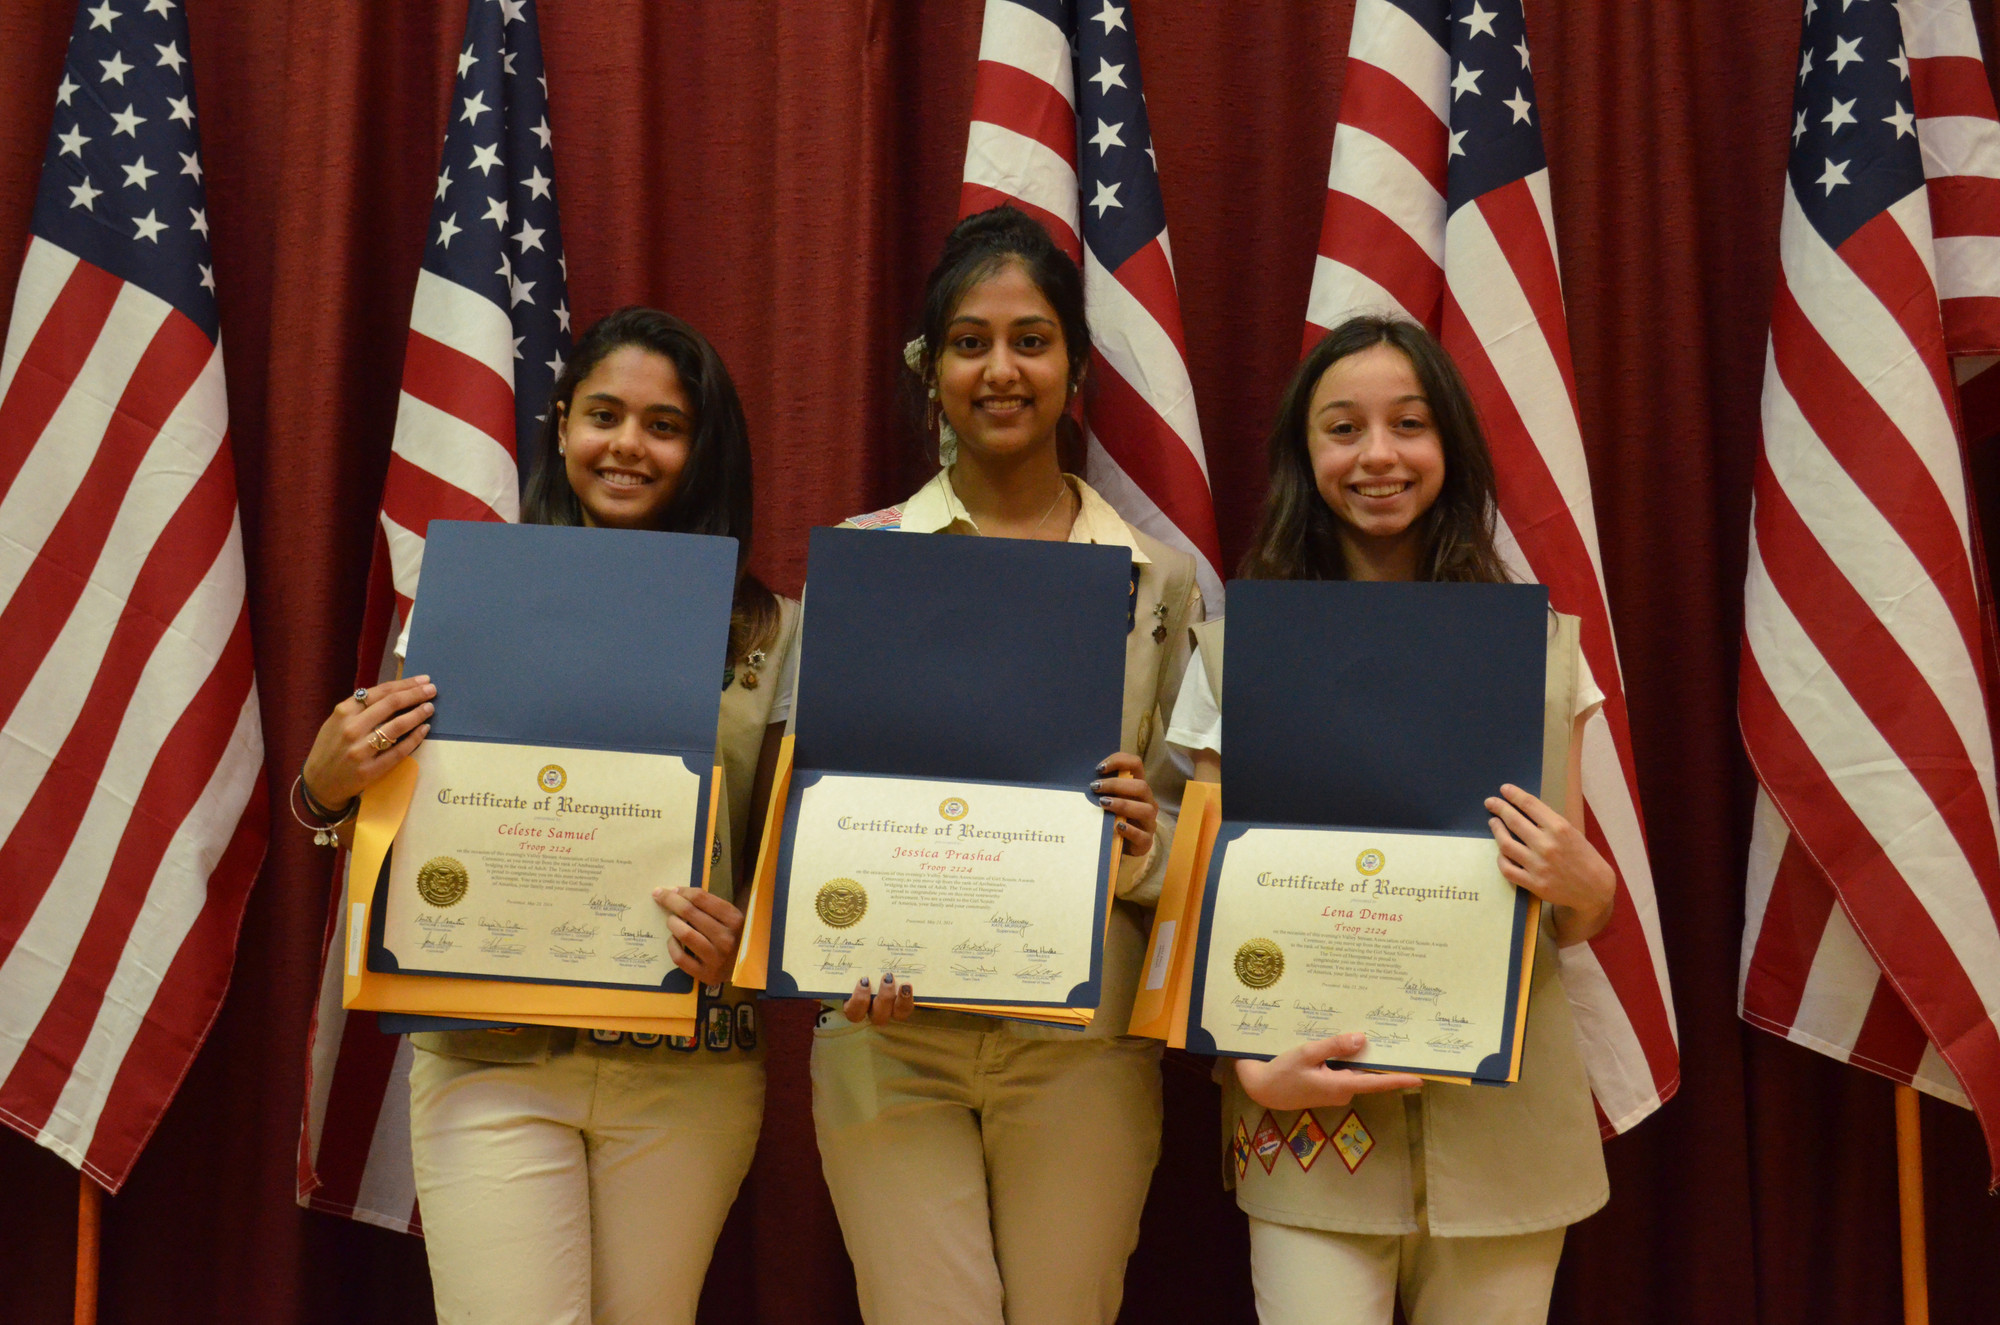 Troop 2124 Girl Scouts, from left, Celeste Samuel, Jessica Prashad and Lena Demas received certificates in recognition of their scouting achievements at a ceremony on May 23.